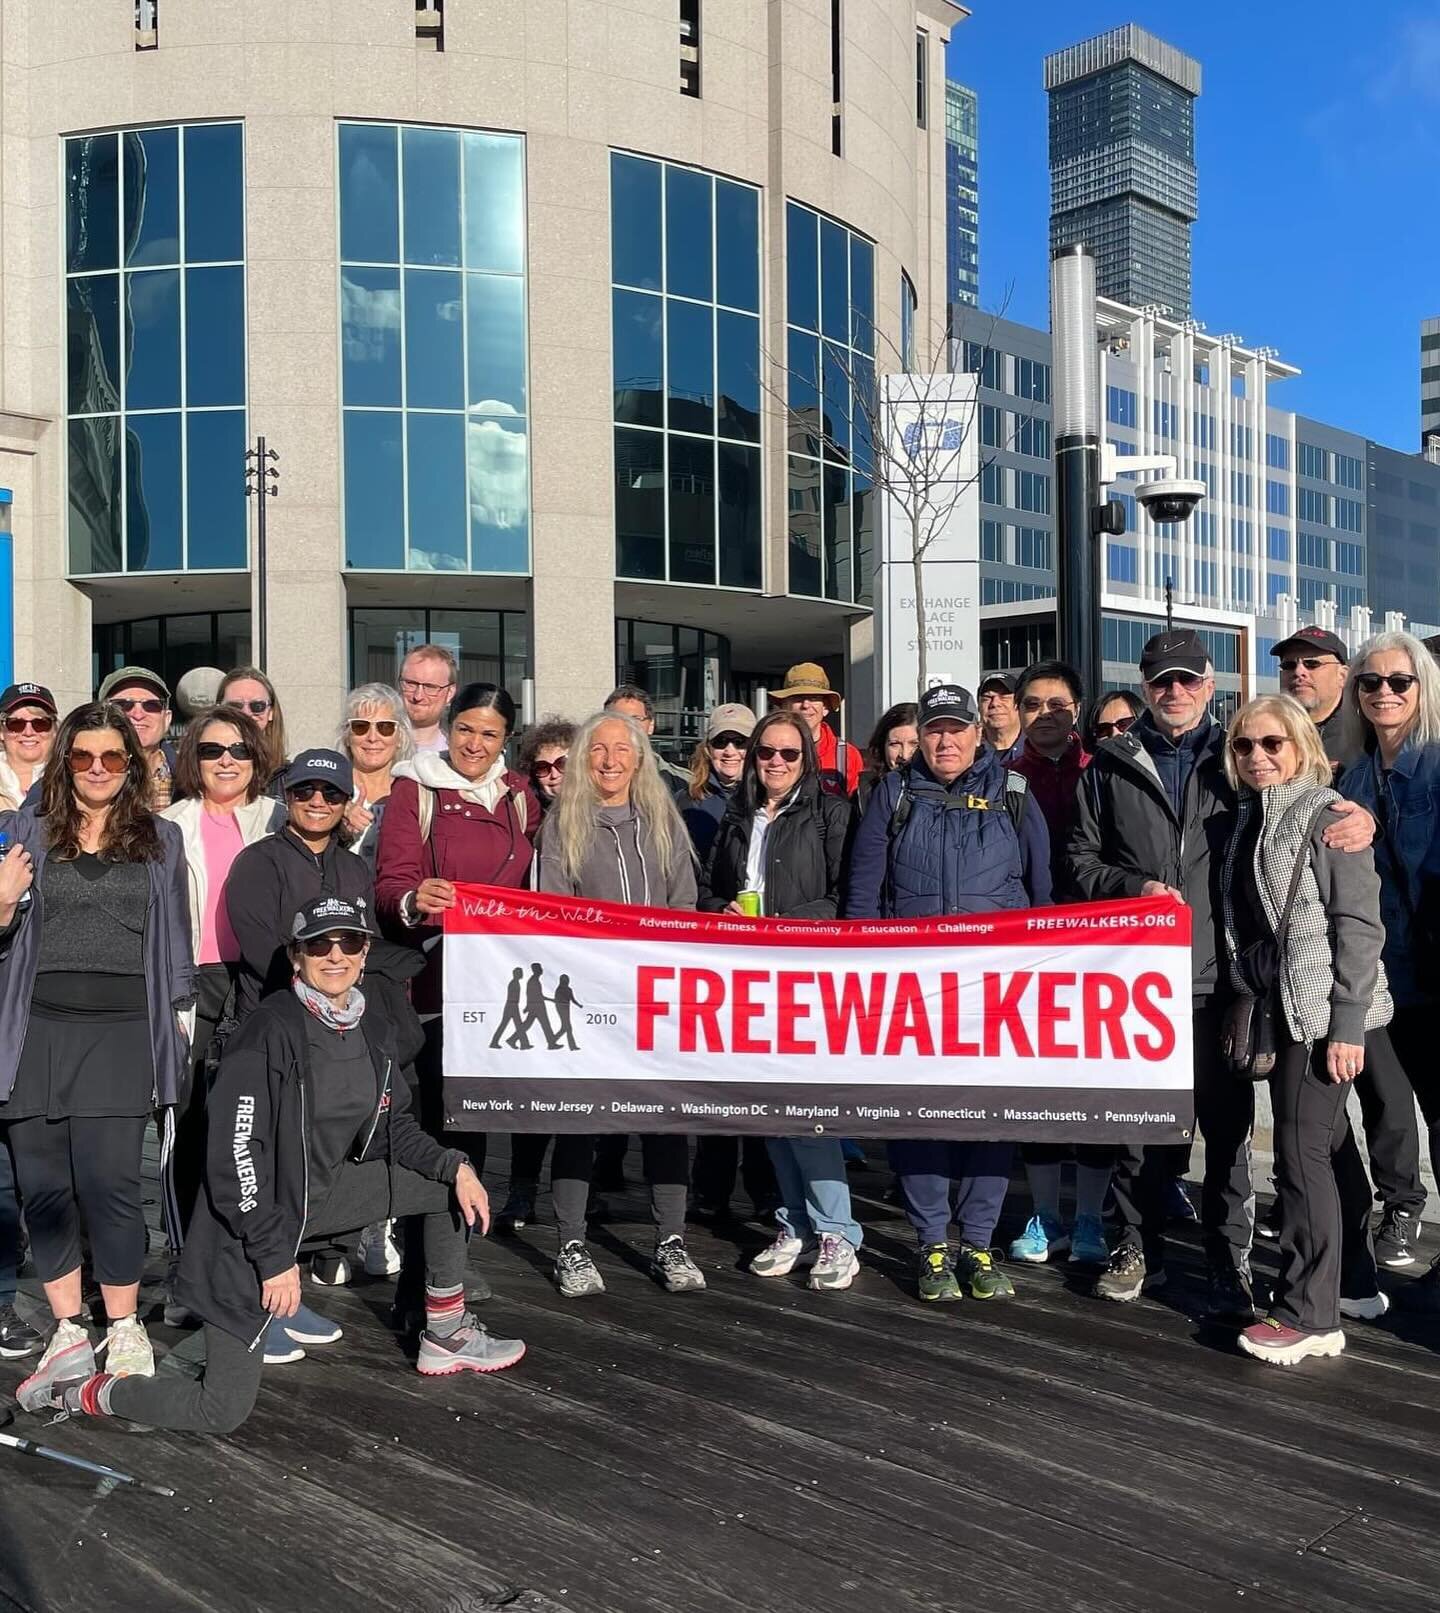 A HUGE thank you to Matt and Sarahjane Rath for leading yesterday&rsquo;s Jersey City Mural Walk in such perfect weather!  We had a great group of about 30 walkers join us, and look forward to continuing these fun and inspiring journeys exploring suc